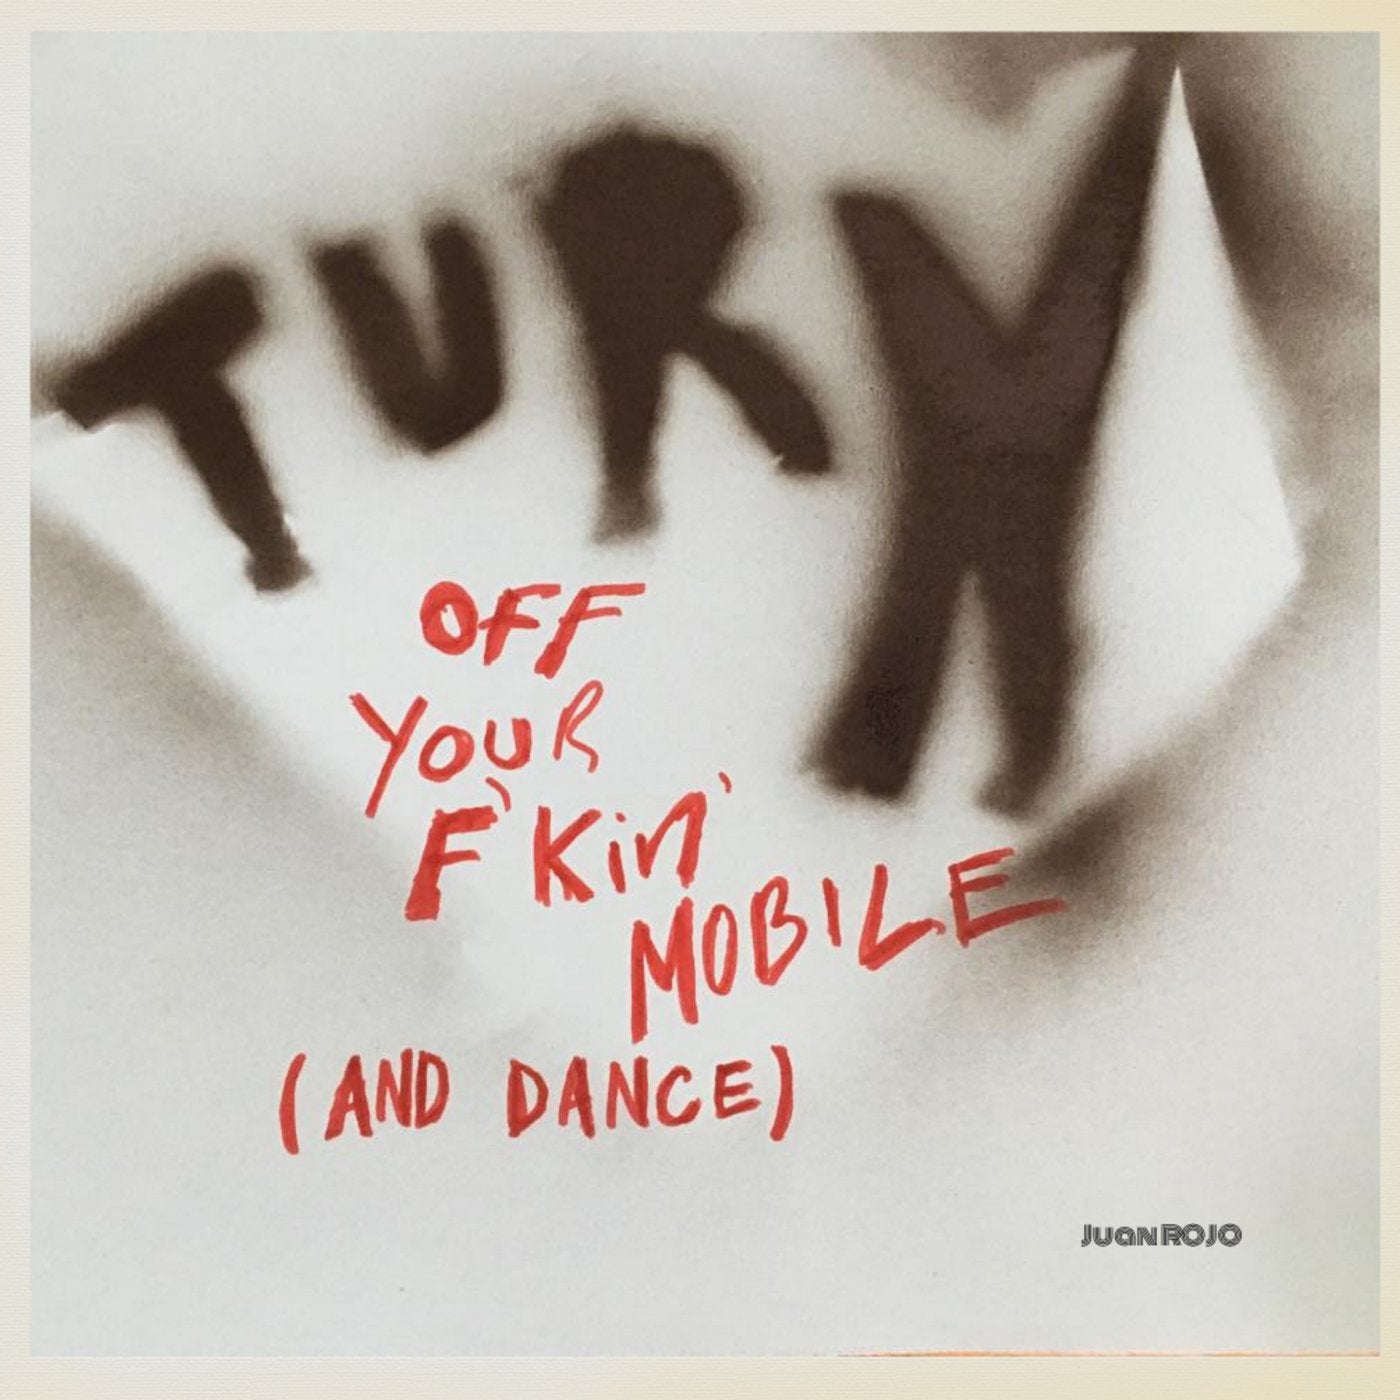 Turn Off Your Fuckin Mobile (And Dance)